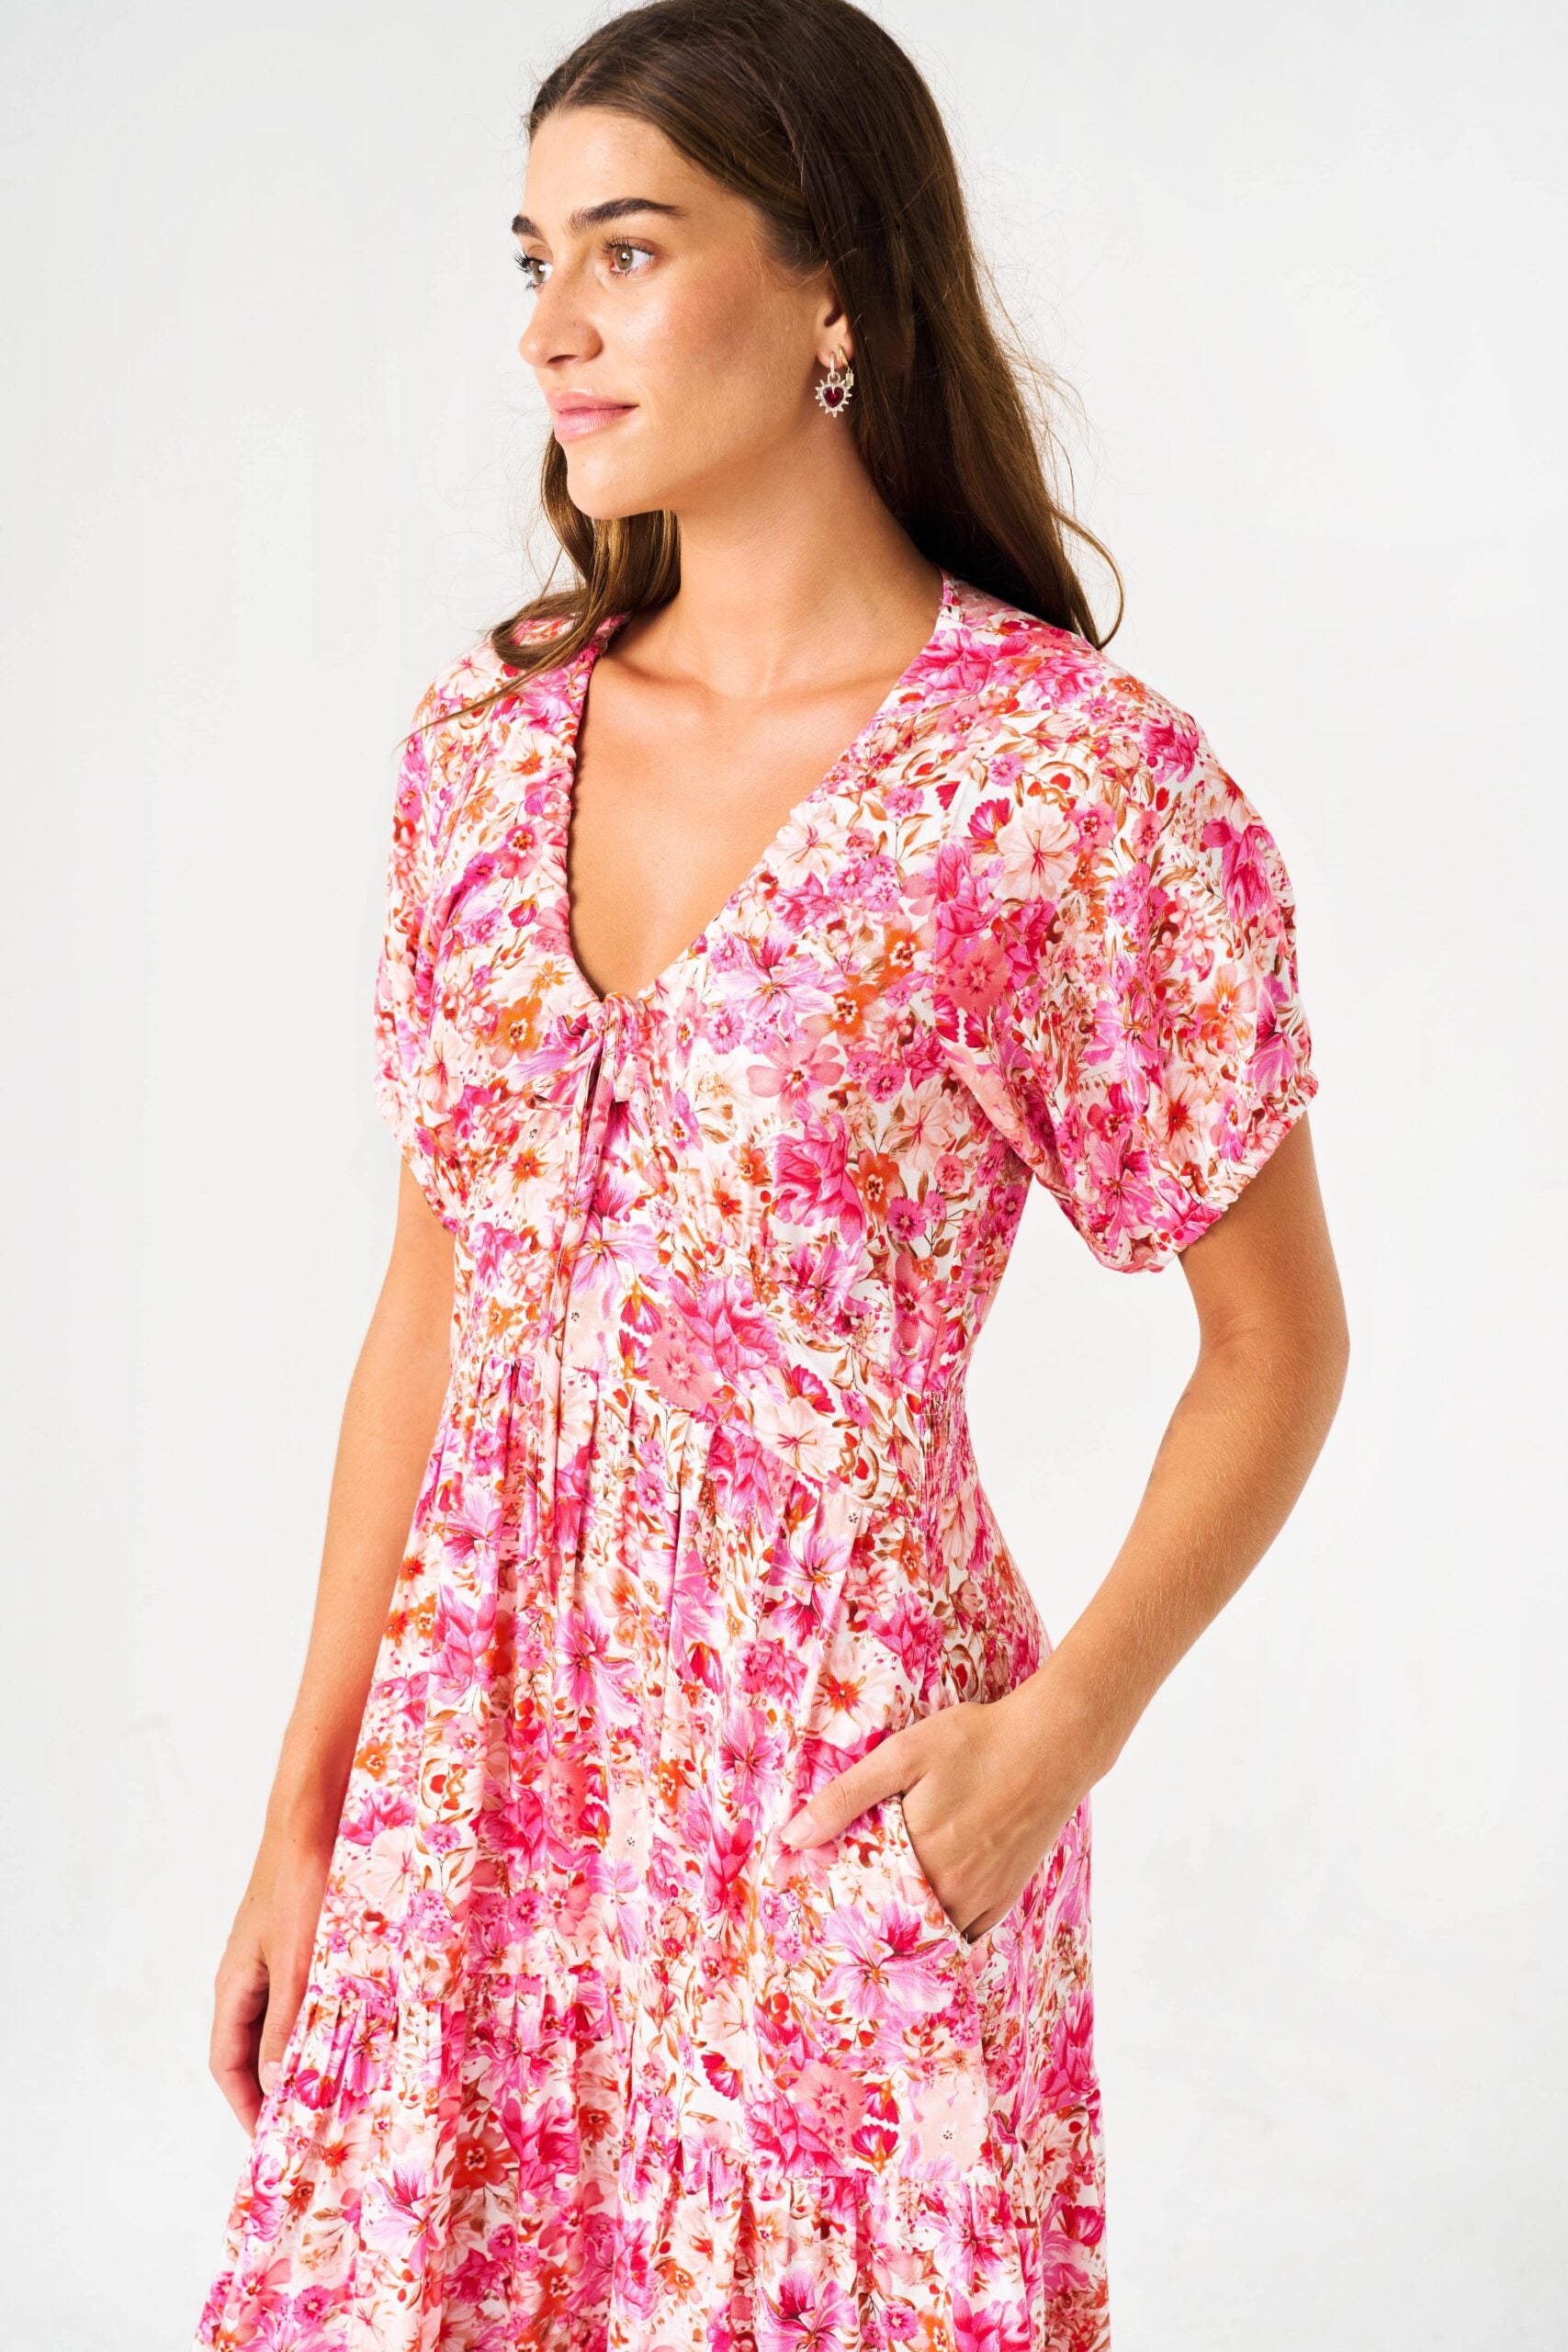 Flowy lightweight rayon. V-neck with adjustable tie-string. Short puff sleeves. Shirred elastic waistband at back. On-seam hip pockets. Tiered Flounce Midi length design